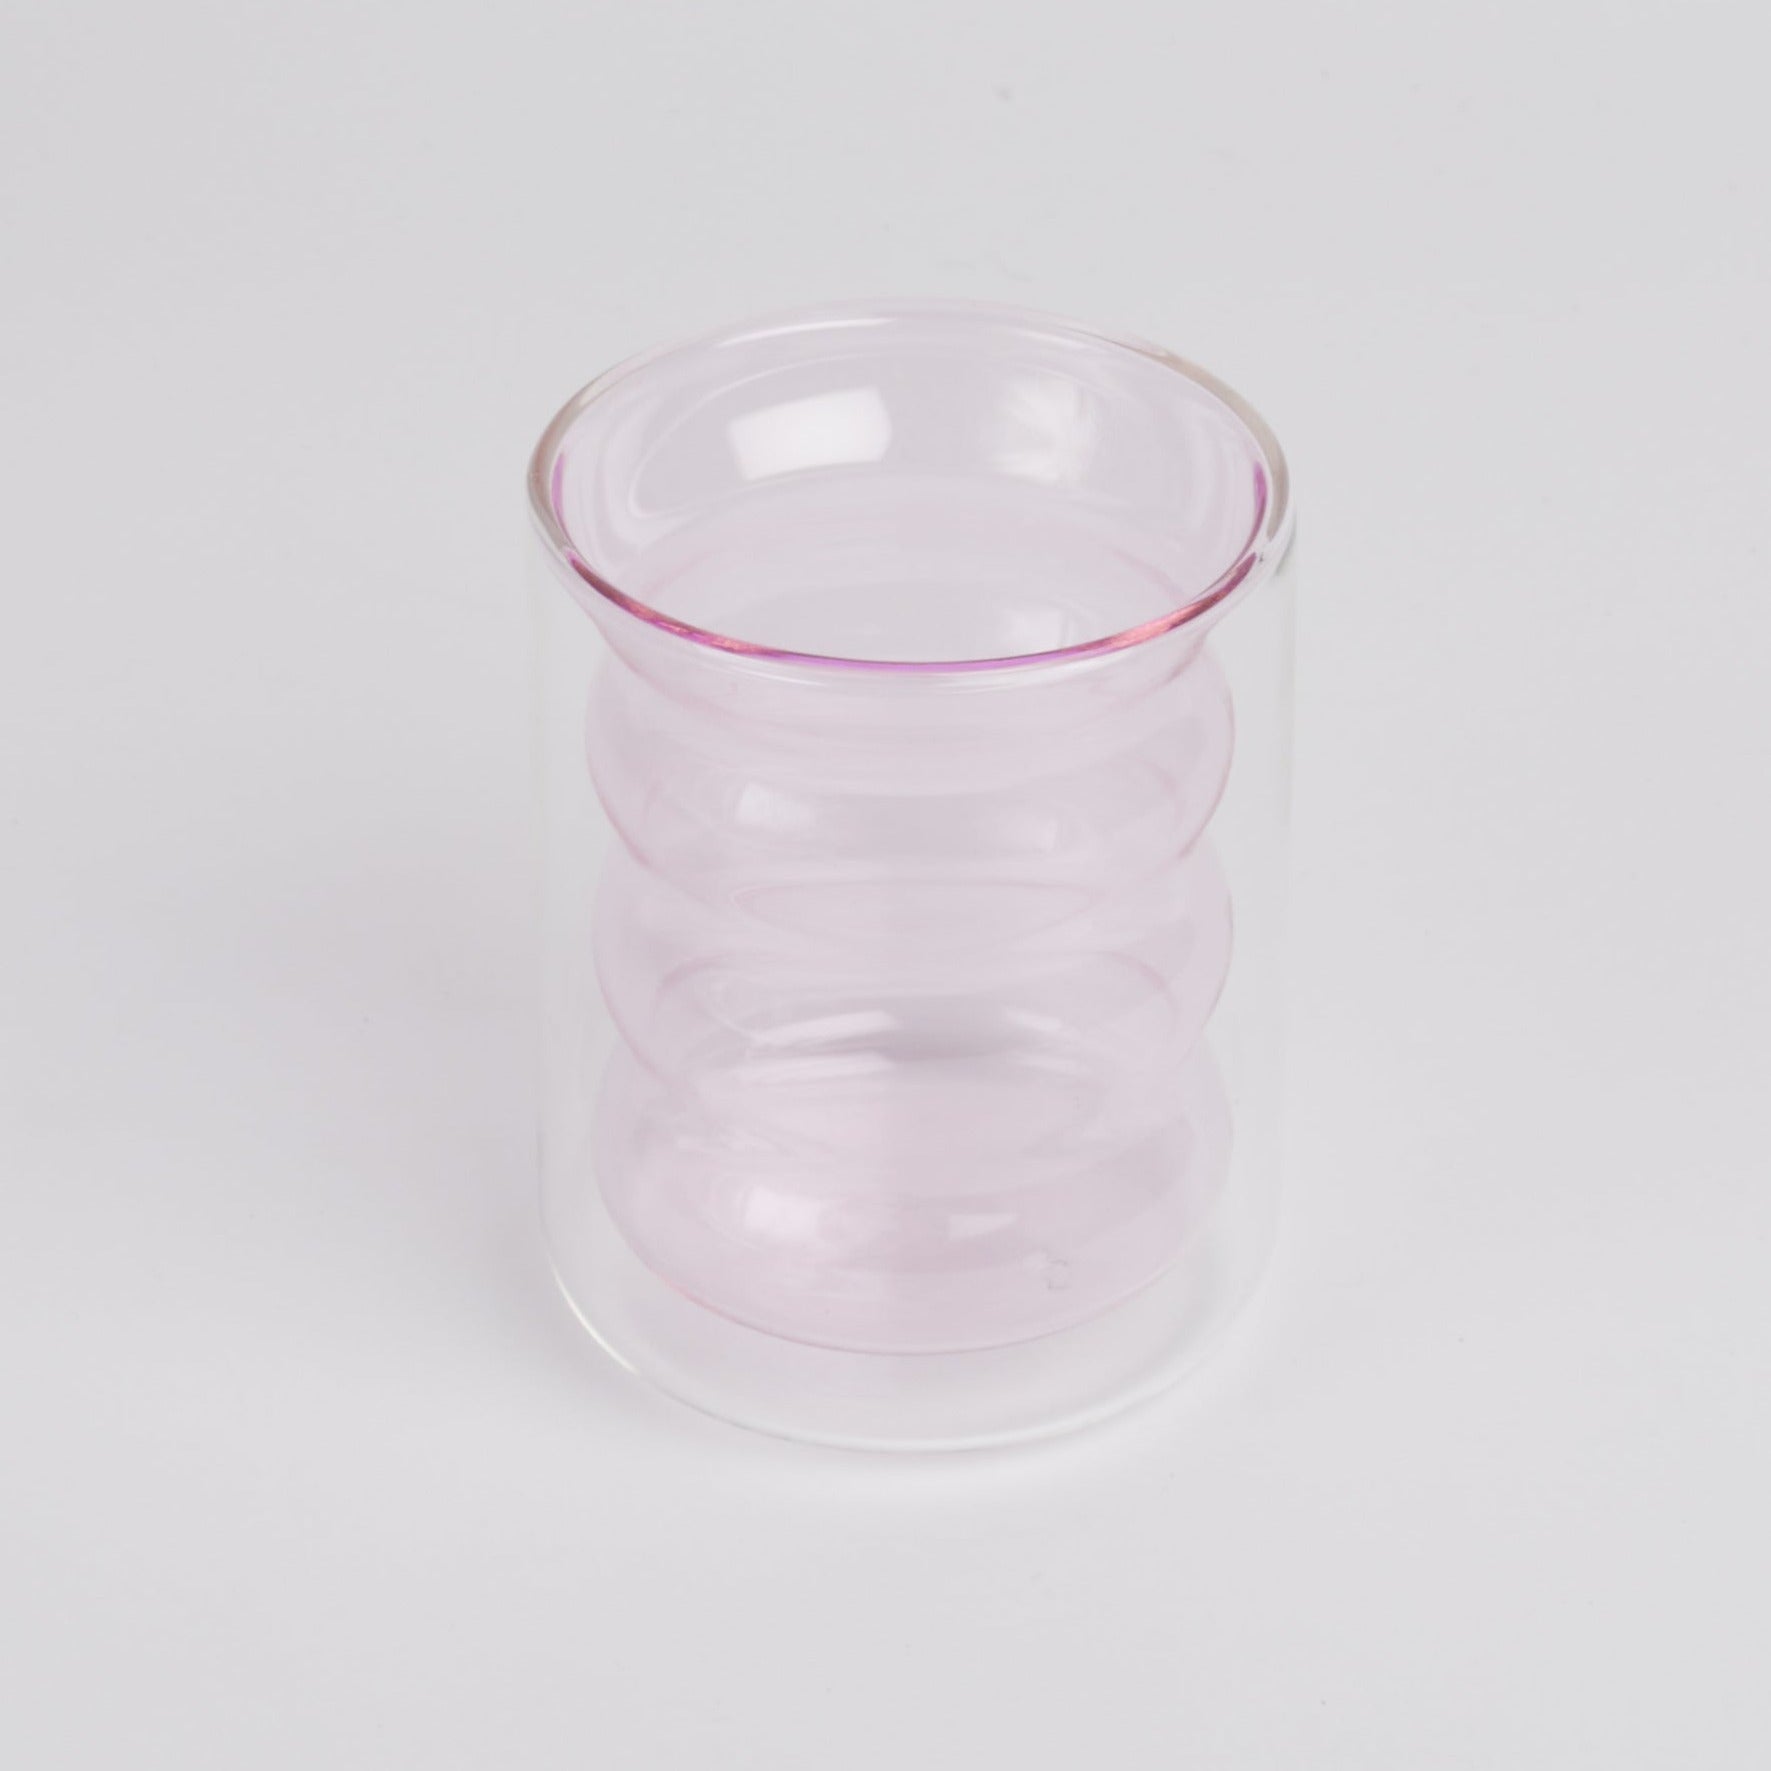 A double-walled light pink rippled glass standing upright shot against a white background.